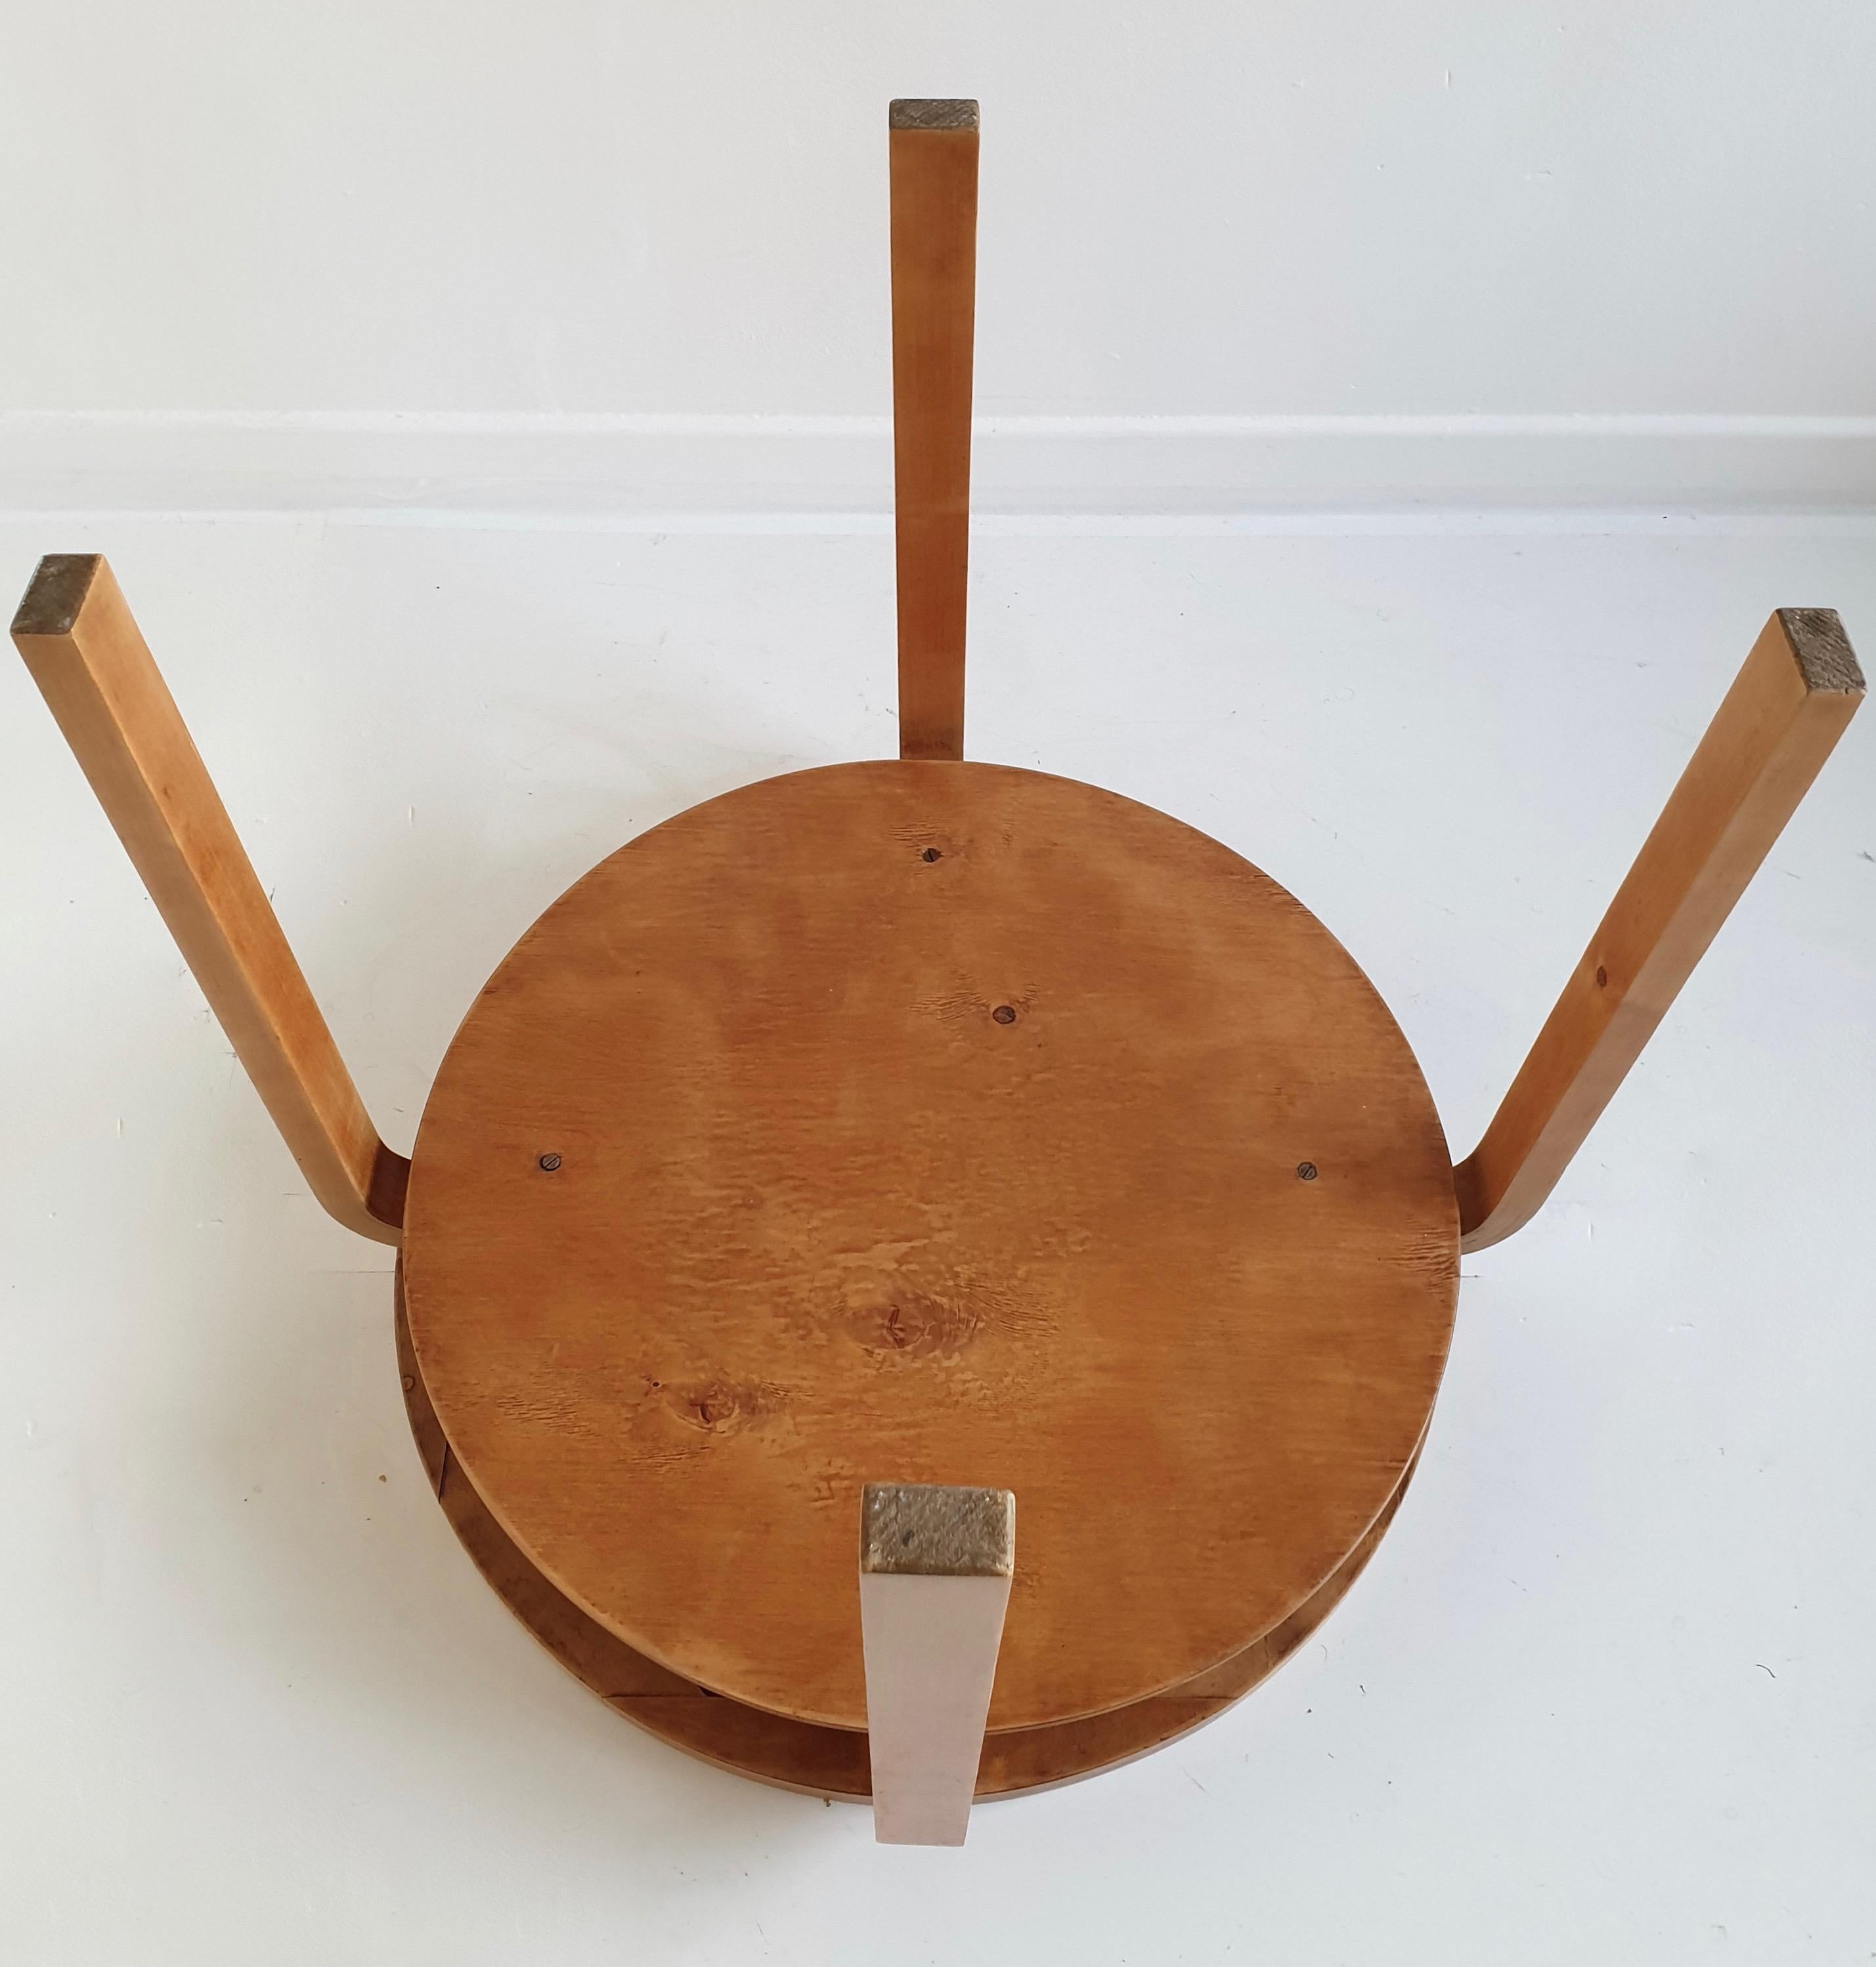 Pair of Rare '907' Stacking Side Tables by Alvar Aalto for Artek, circa 1940 For Sale 1